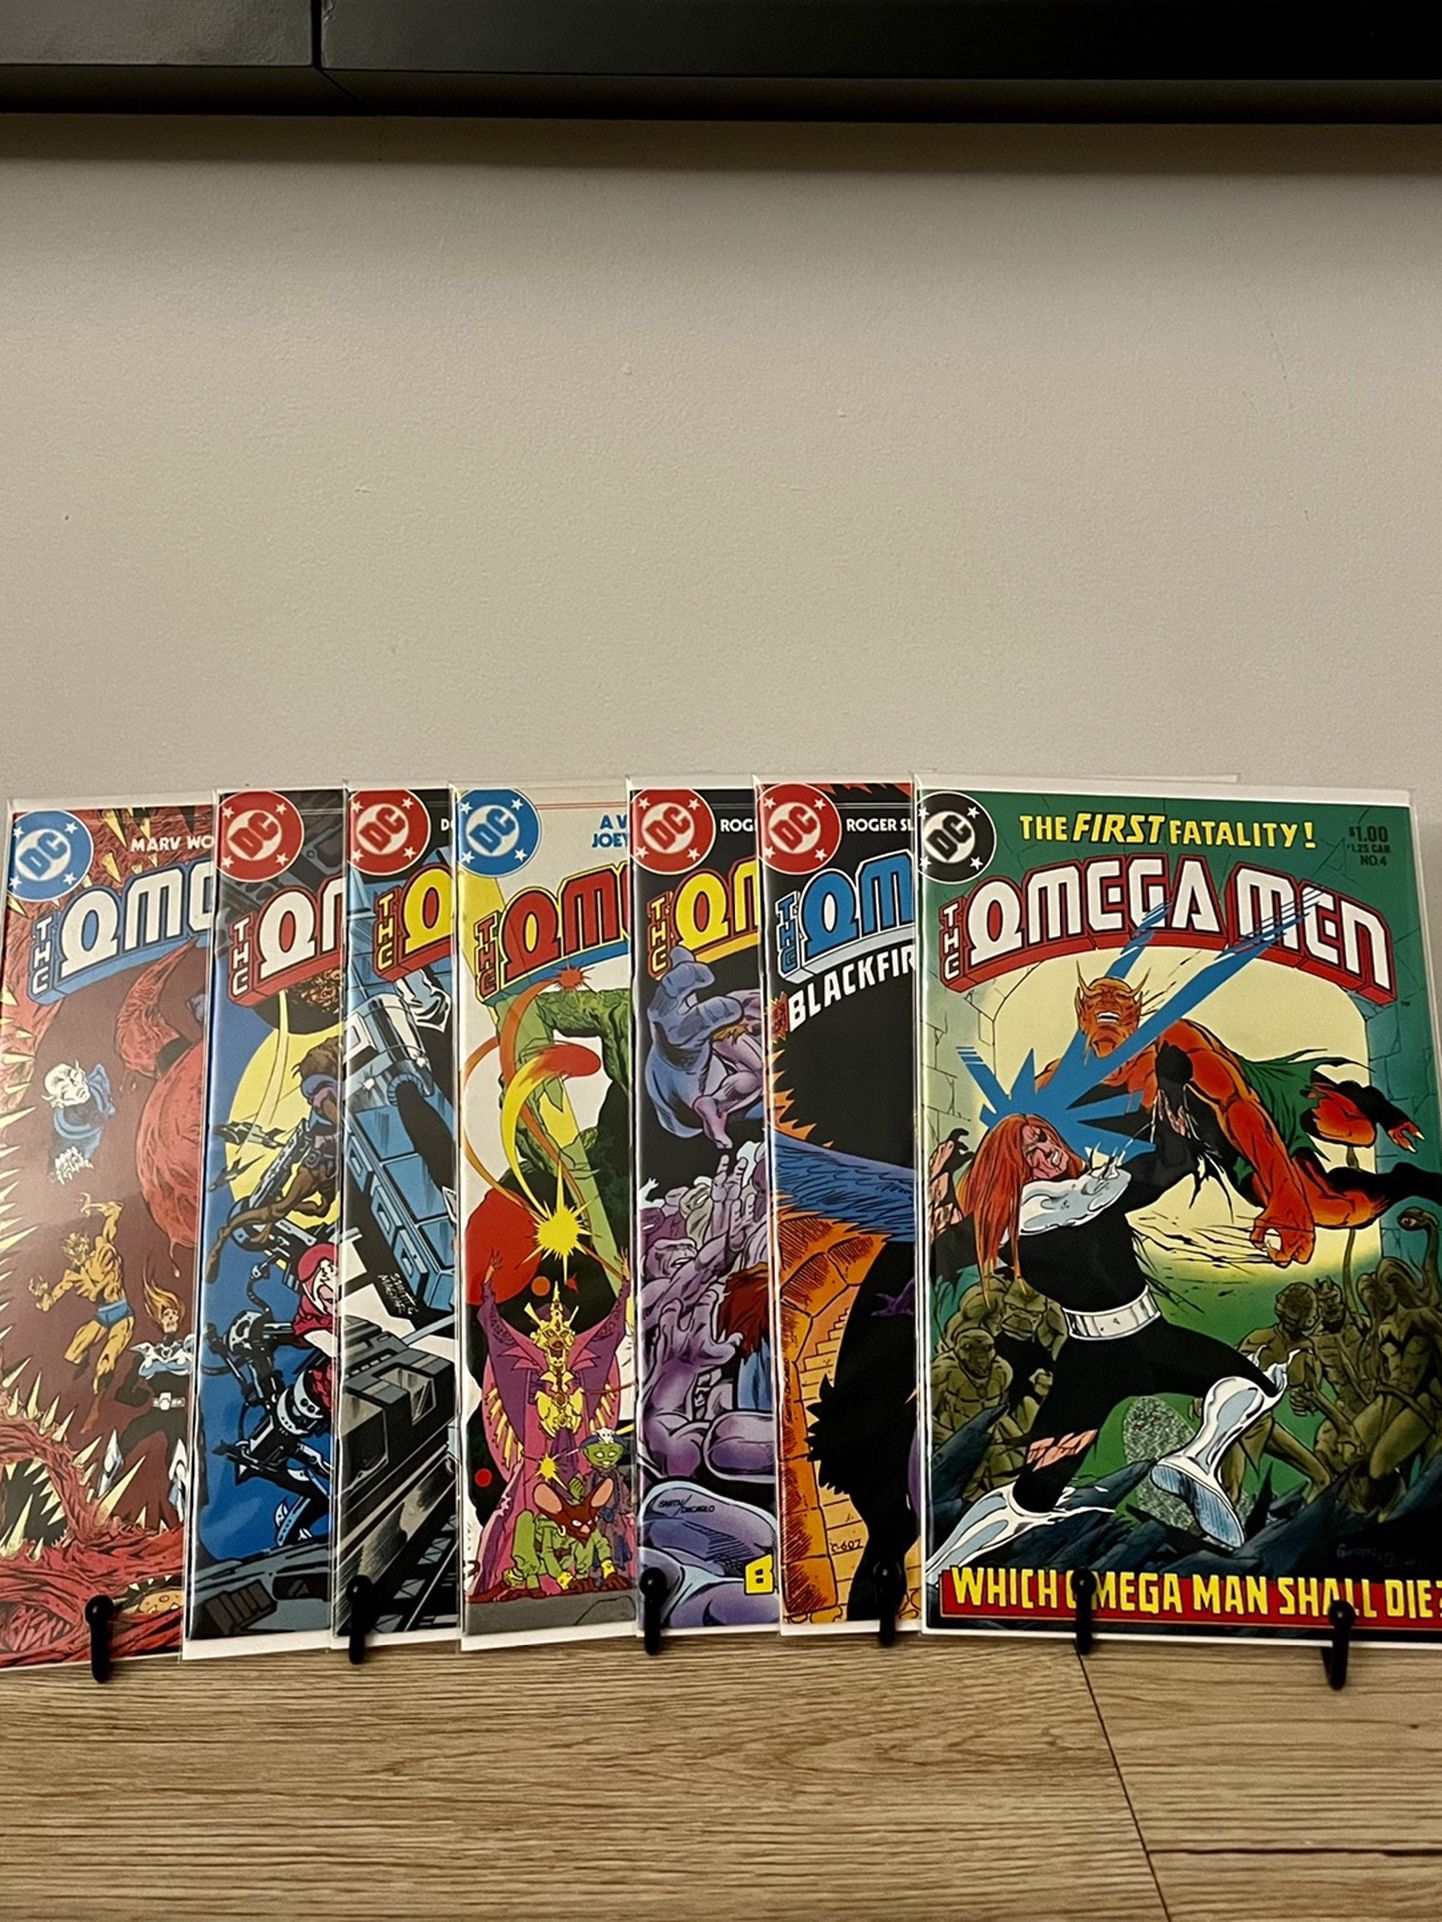 $20 - The Omega Men (Various Covers) // VF+